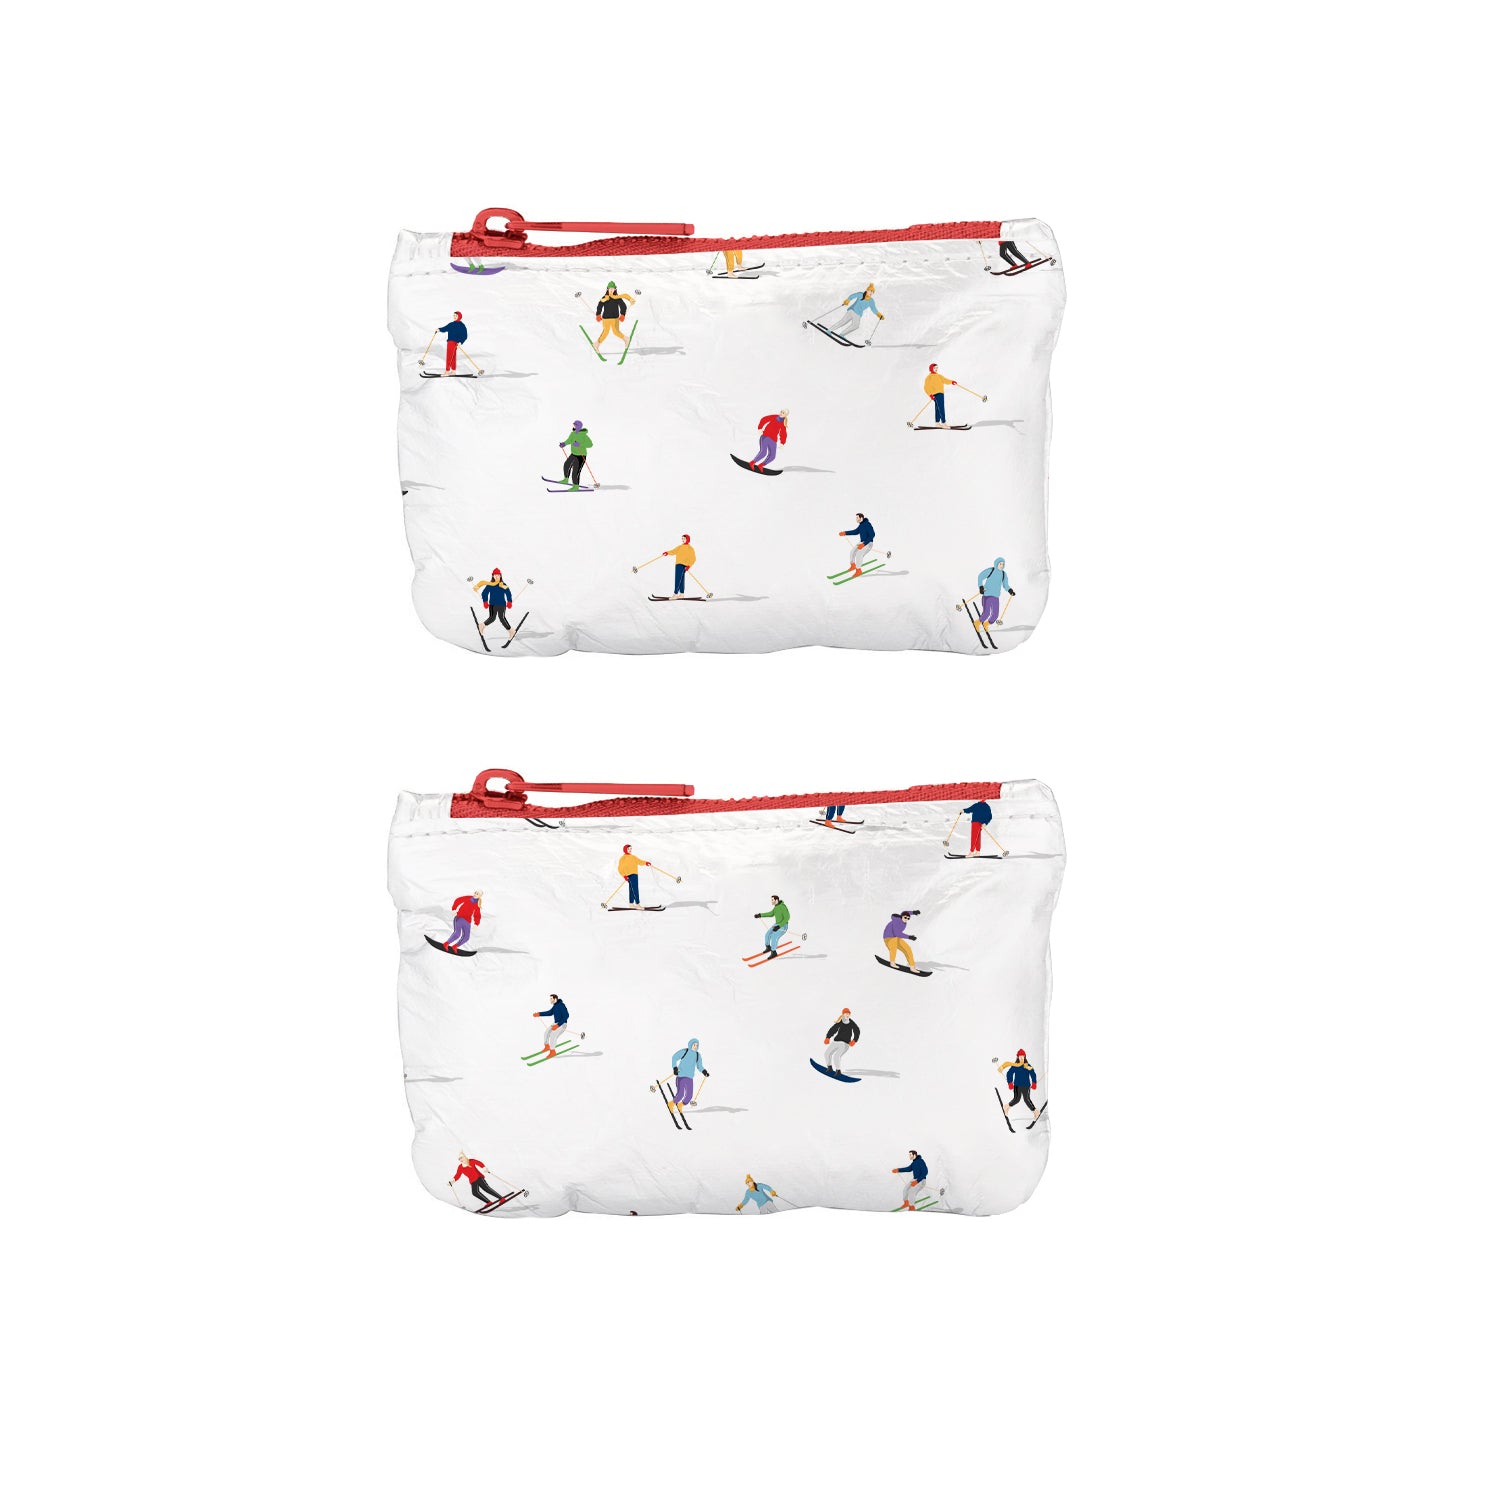 Set of two gift card holder packs in dancing skiers with a red zipper